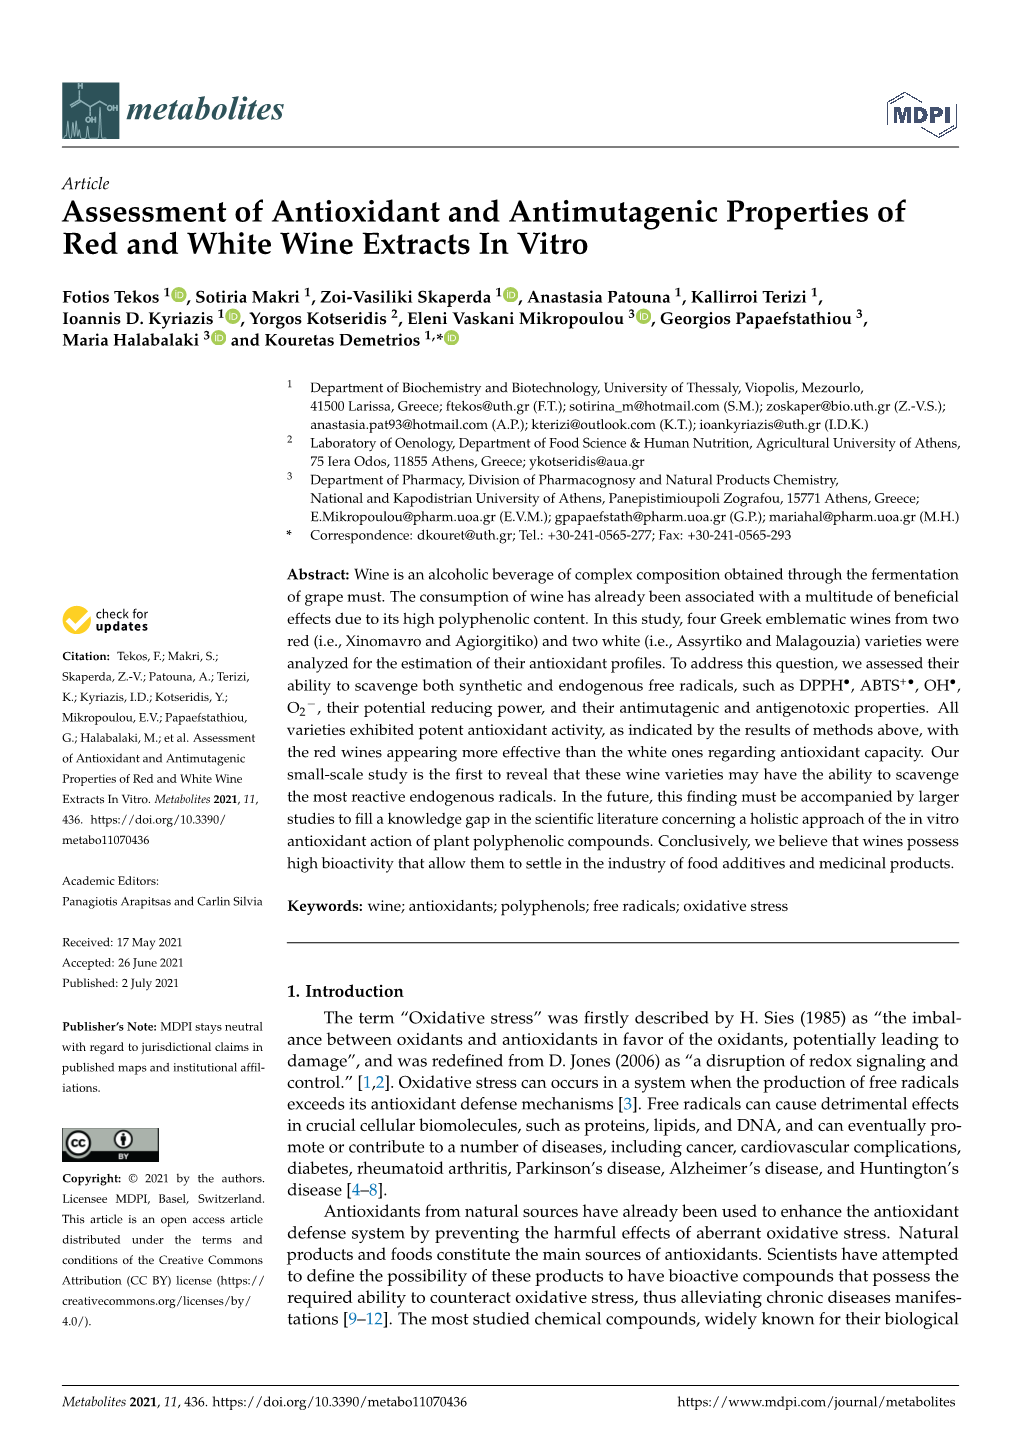 Assessment of Antioxidant and Antimutagenic Properties of Red and White Wine Extracts in Vitro